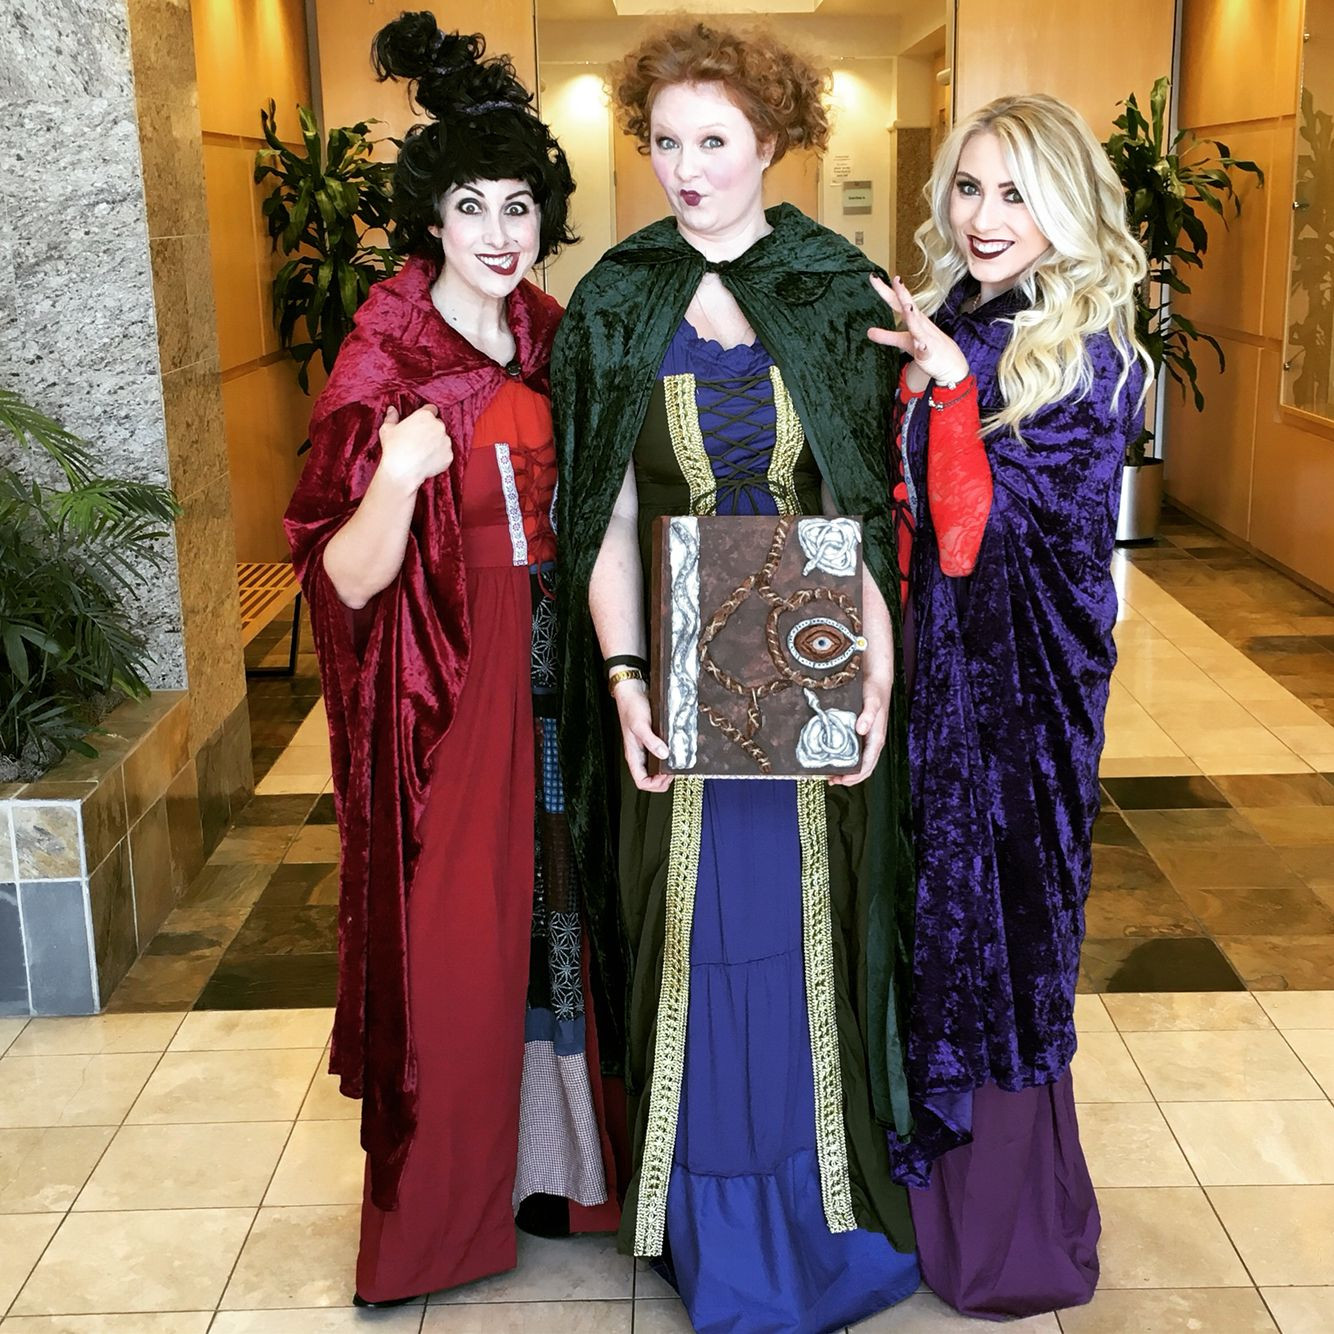 The Best Diy Hocus Pocus Costumes – Home, Family, Style and Art Ideas